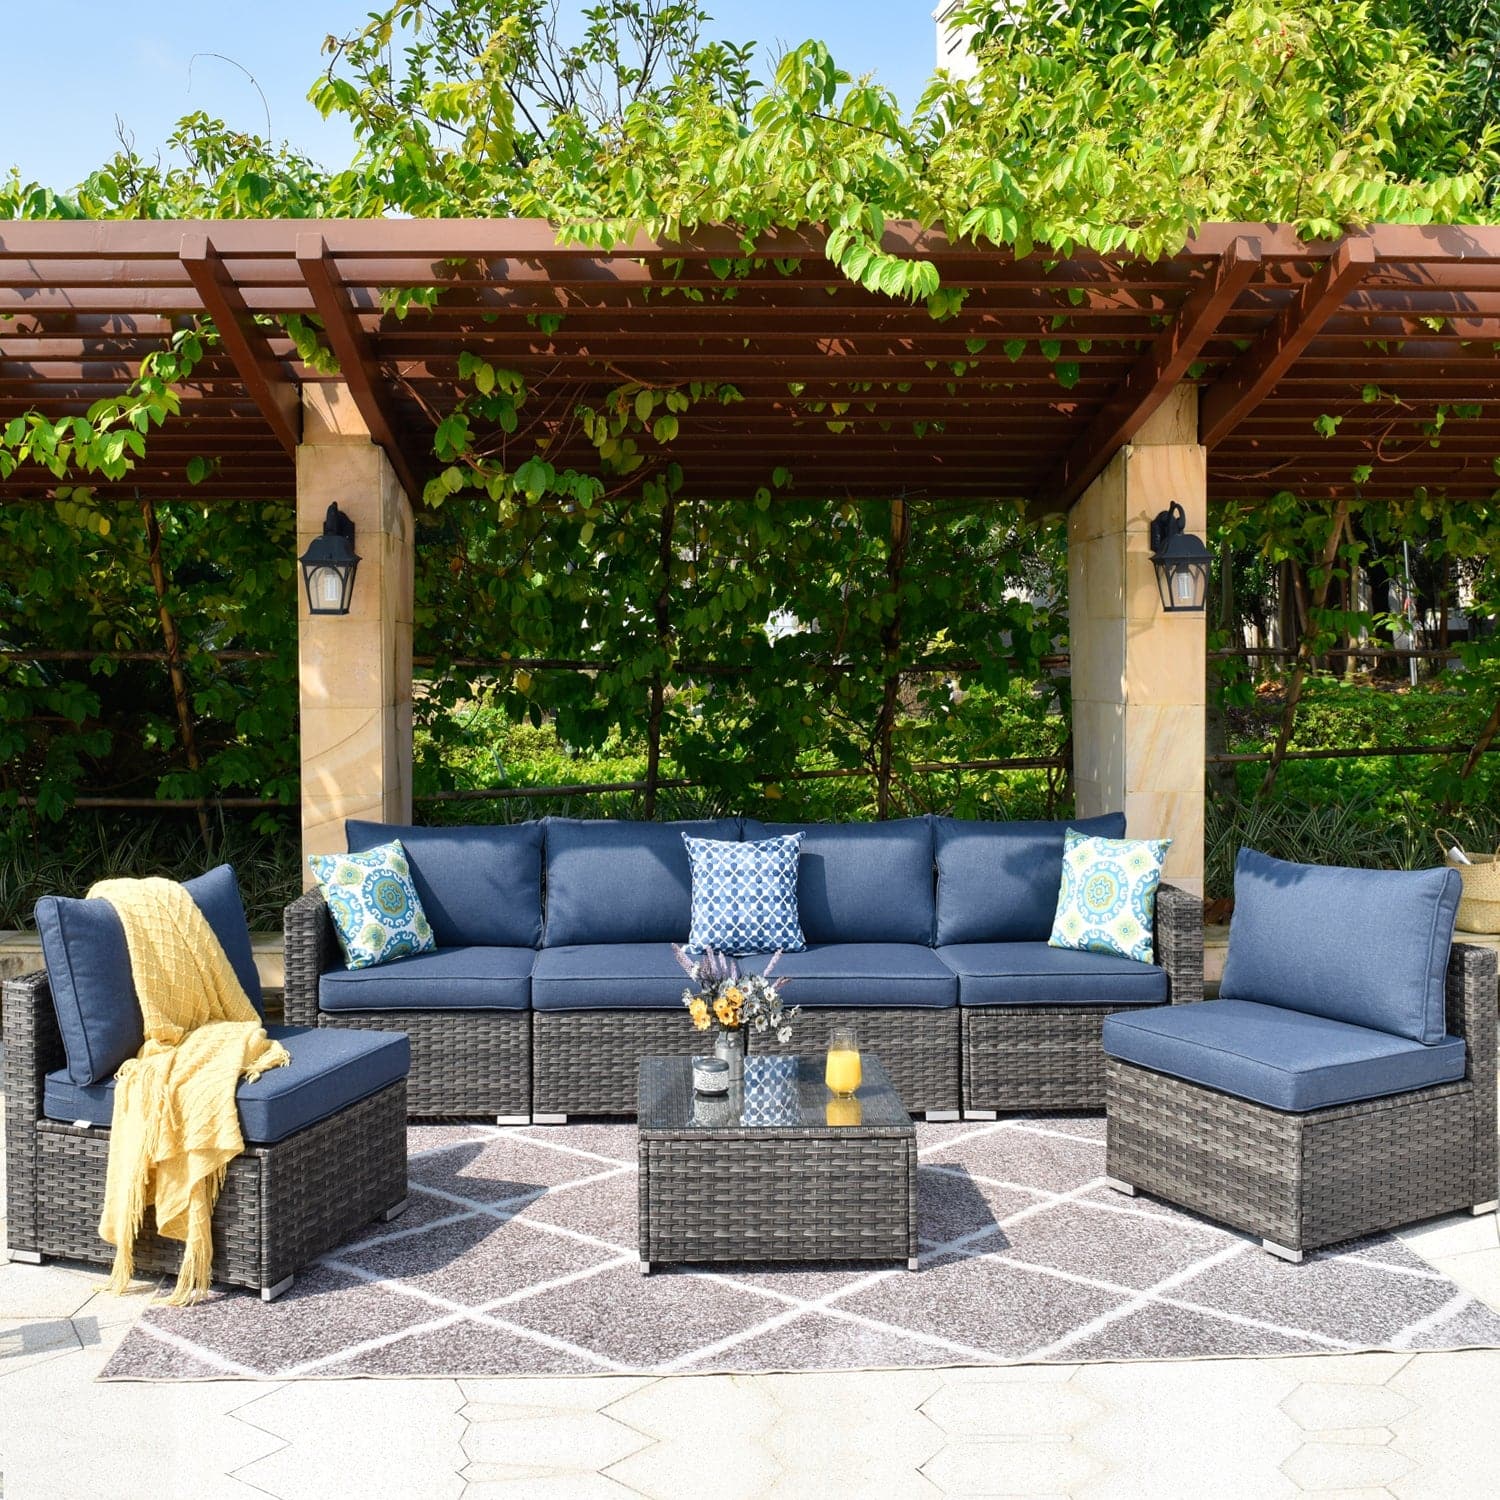 10 Convincing Reasons to Cozy Up with an Outdoor Sectional